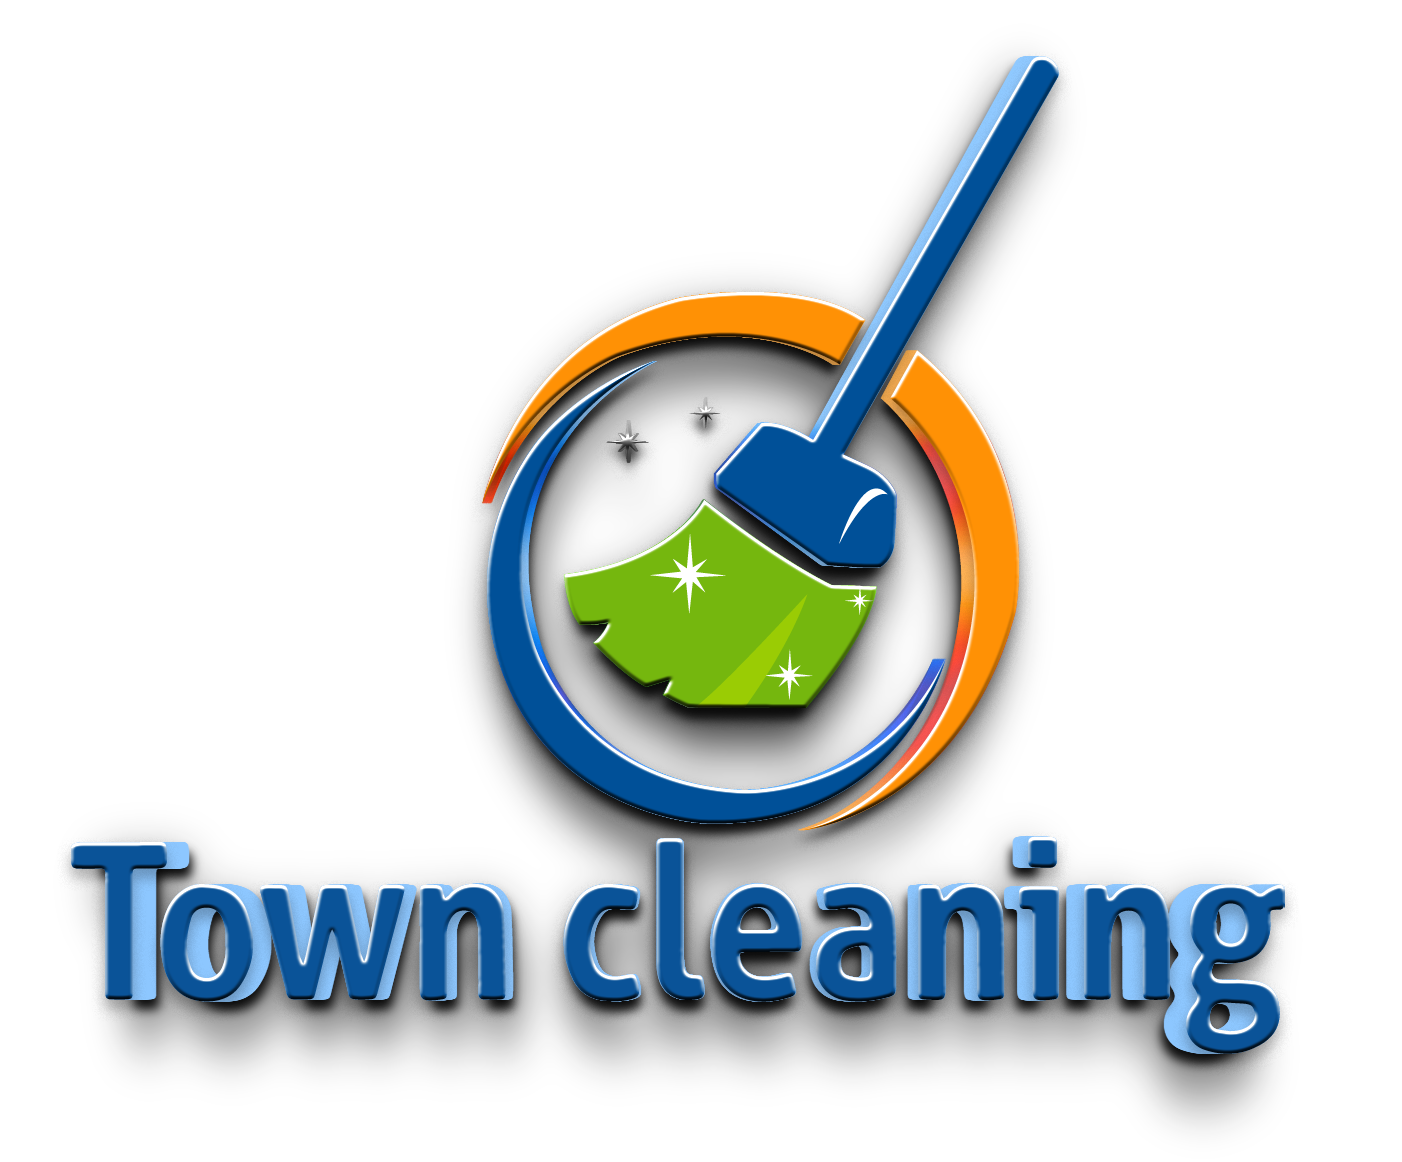 Town cleaning logo